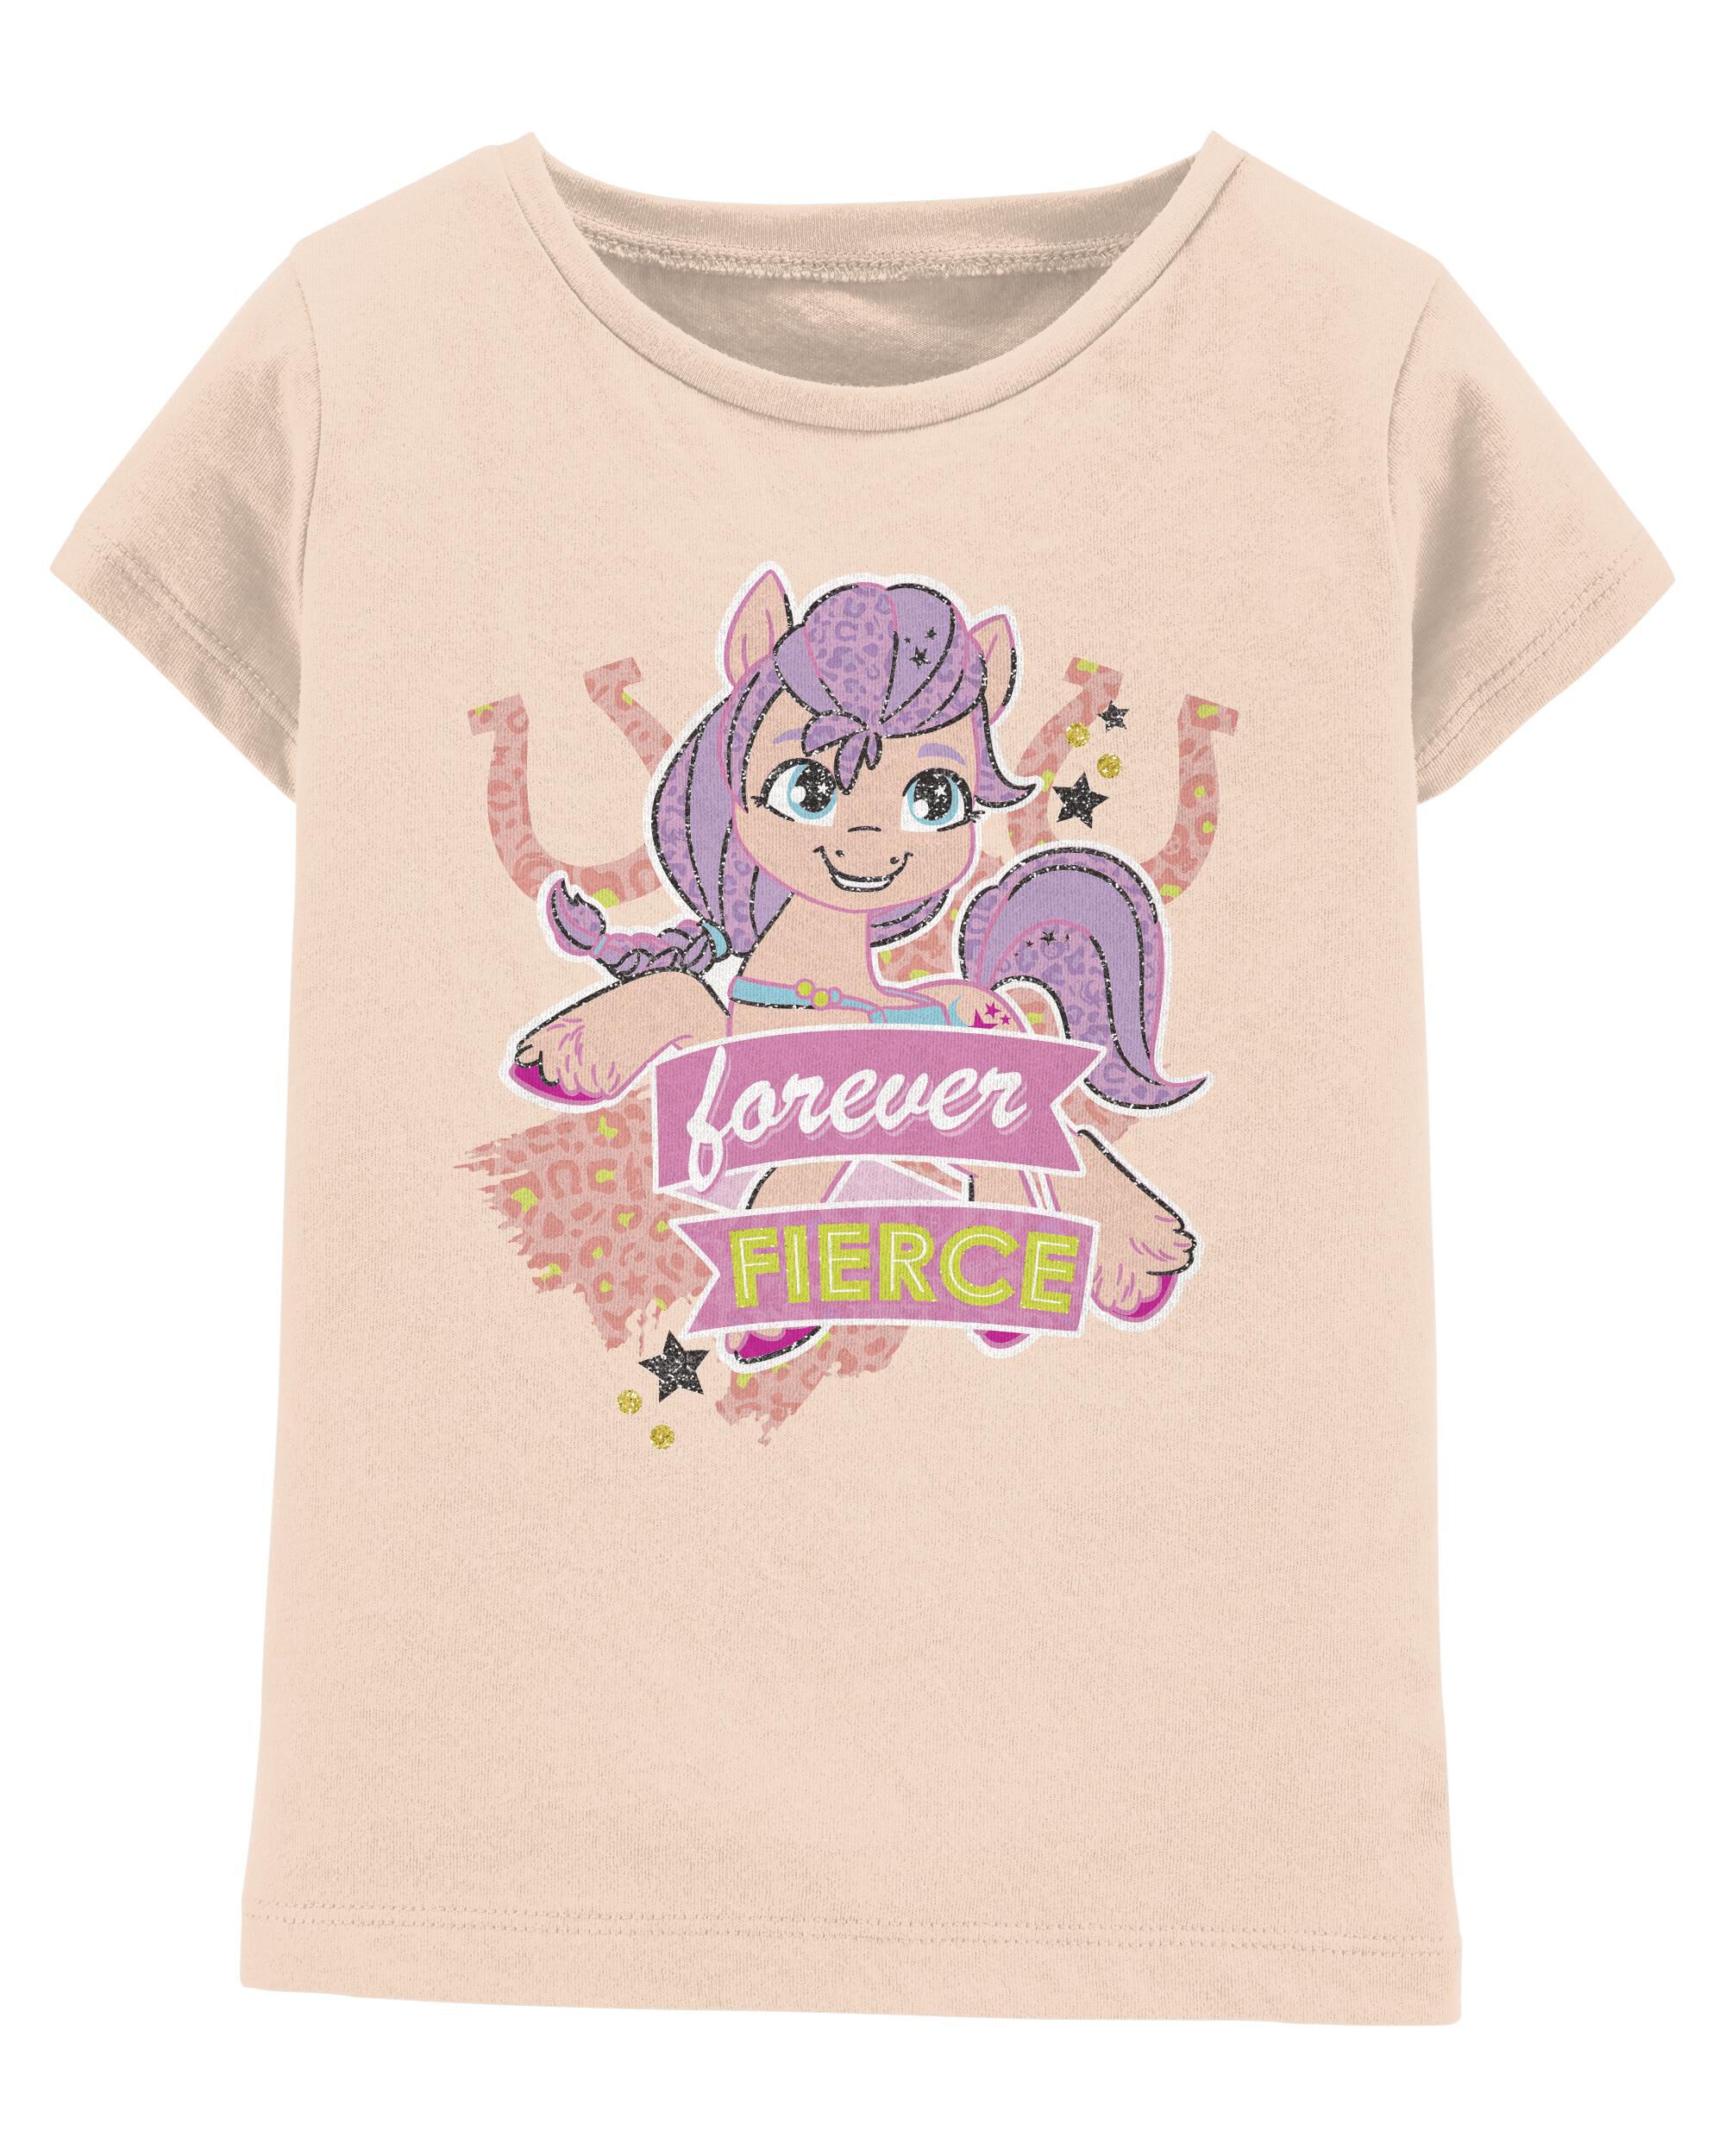 Toddler My Little Pony Tee